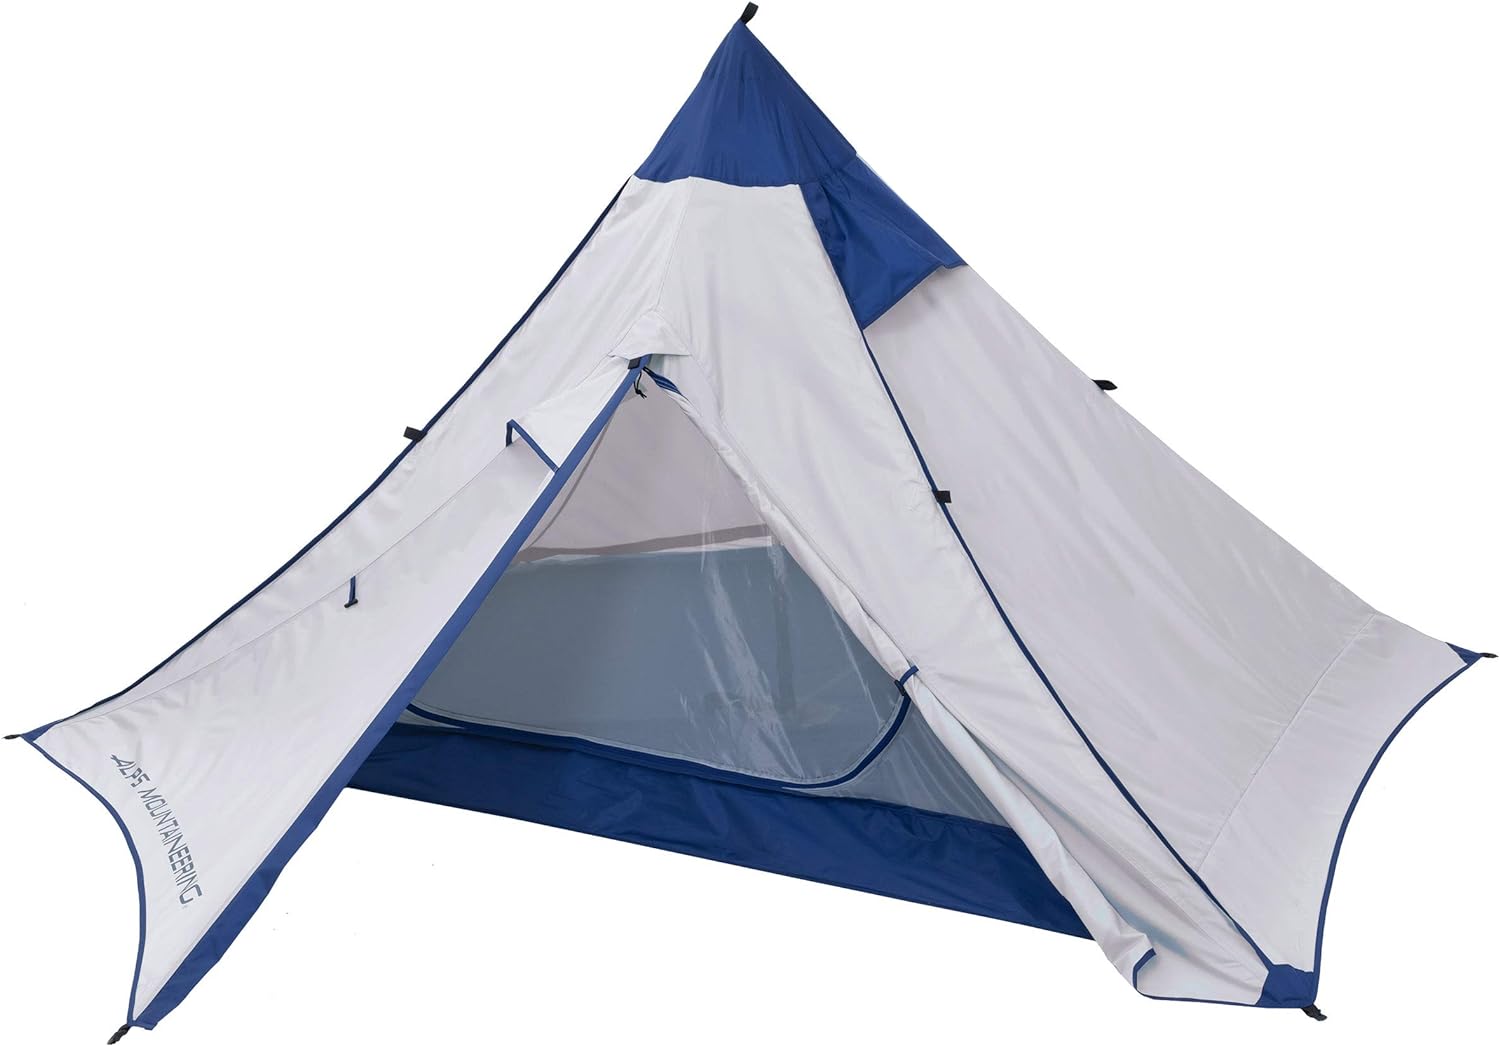 Lookover of ALPS Mountaineering Trail Tipi 2-Person Tent